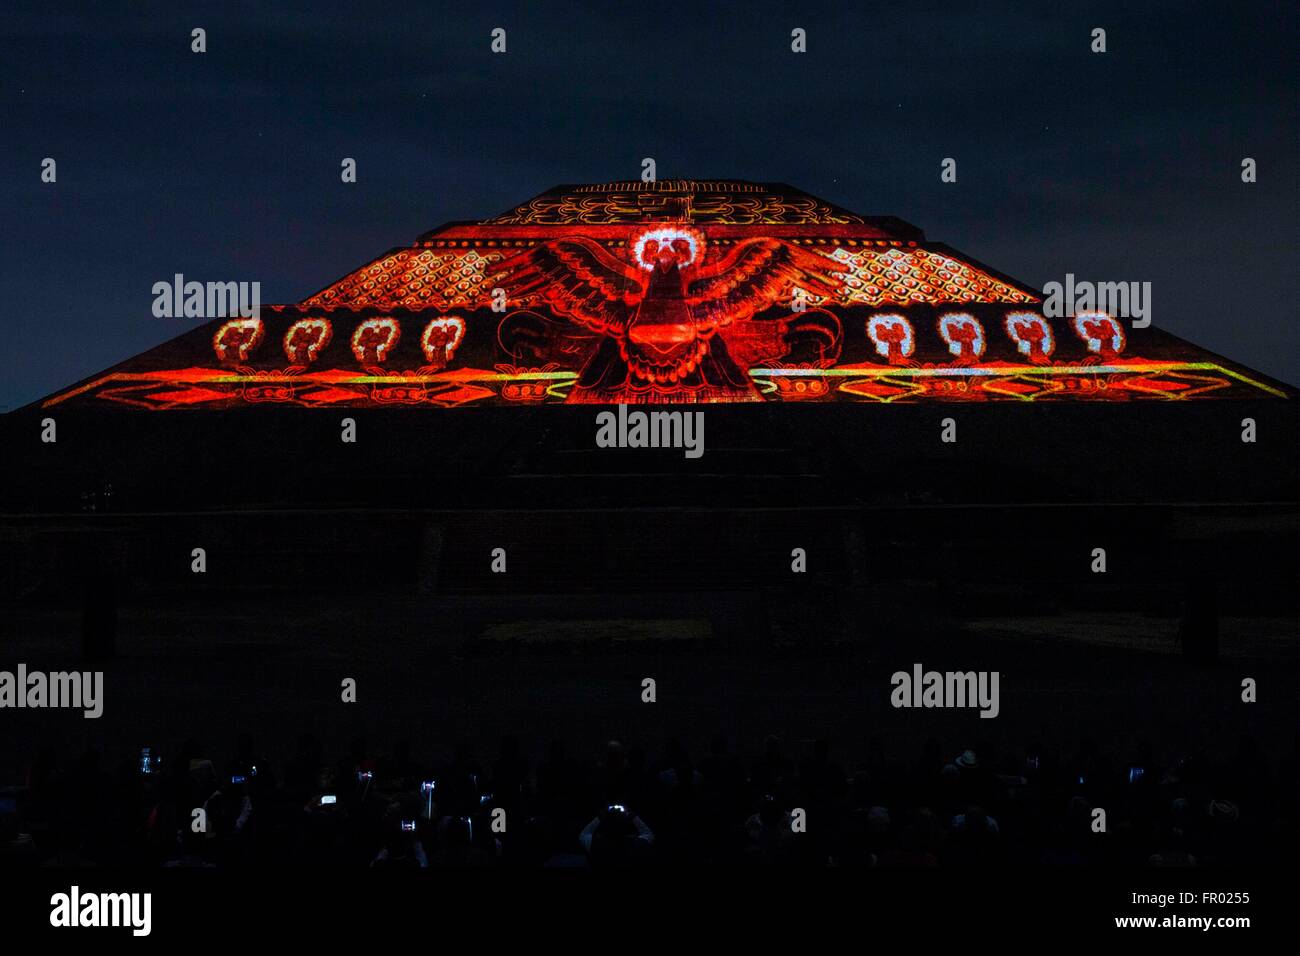 Mexico City, Mexico. 20th Mar, 2016. The pyramid of the Sun & Moon at the Teotihuacan archeological site is lit during the first light and sound show ever presented at the World Heritage site known as The City of the Gods March 19, 2016 in Mexico City, Mexico. Mexican President Enrique Pena Nieto inaugurated the event which is expected to attract more visitors to the cultural attraction. Stock Photo